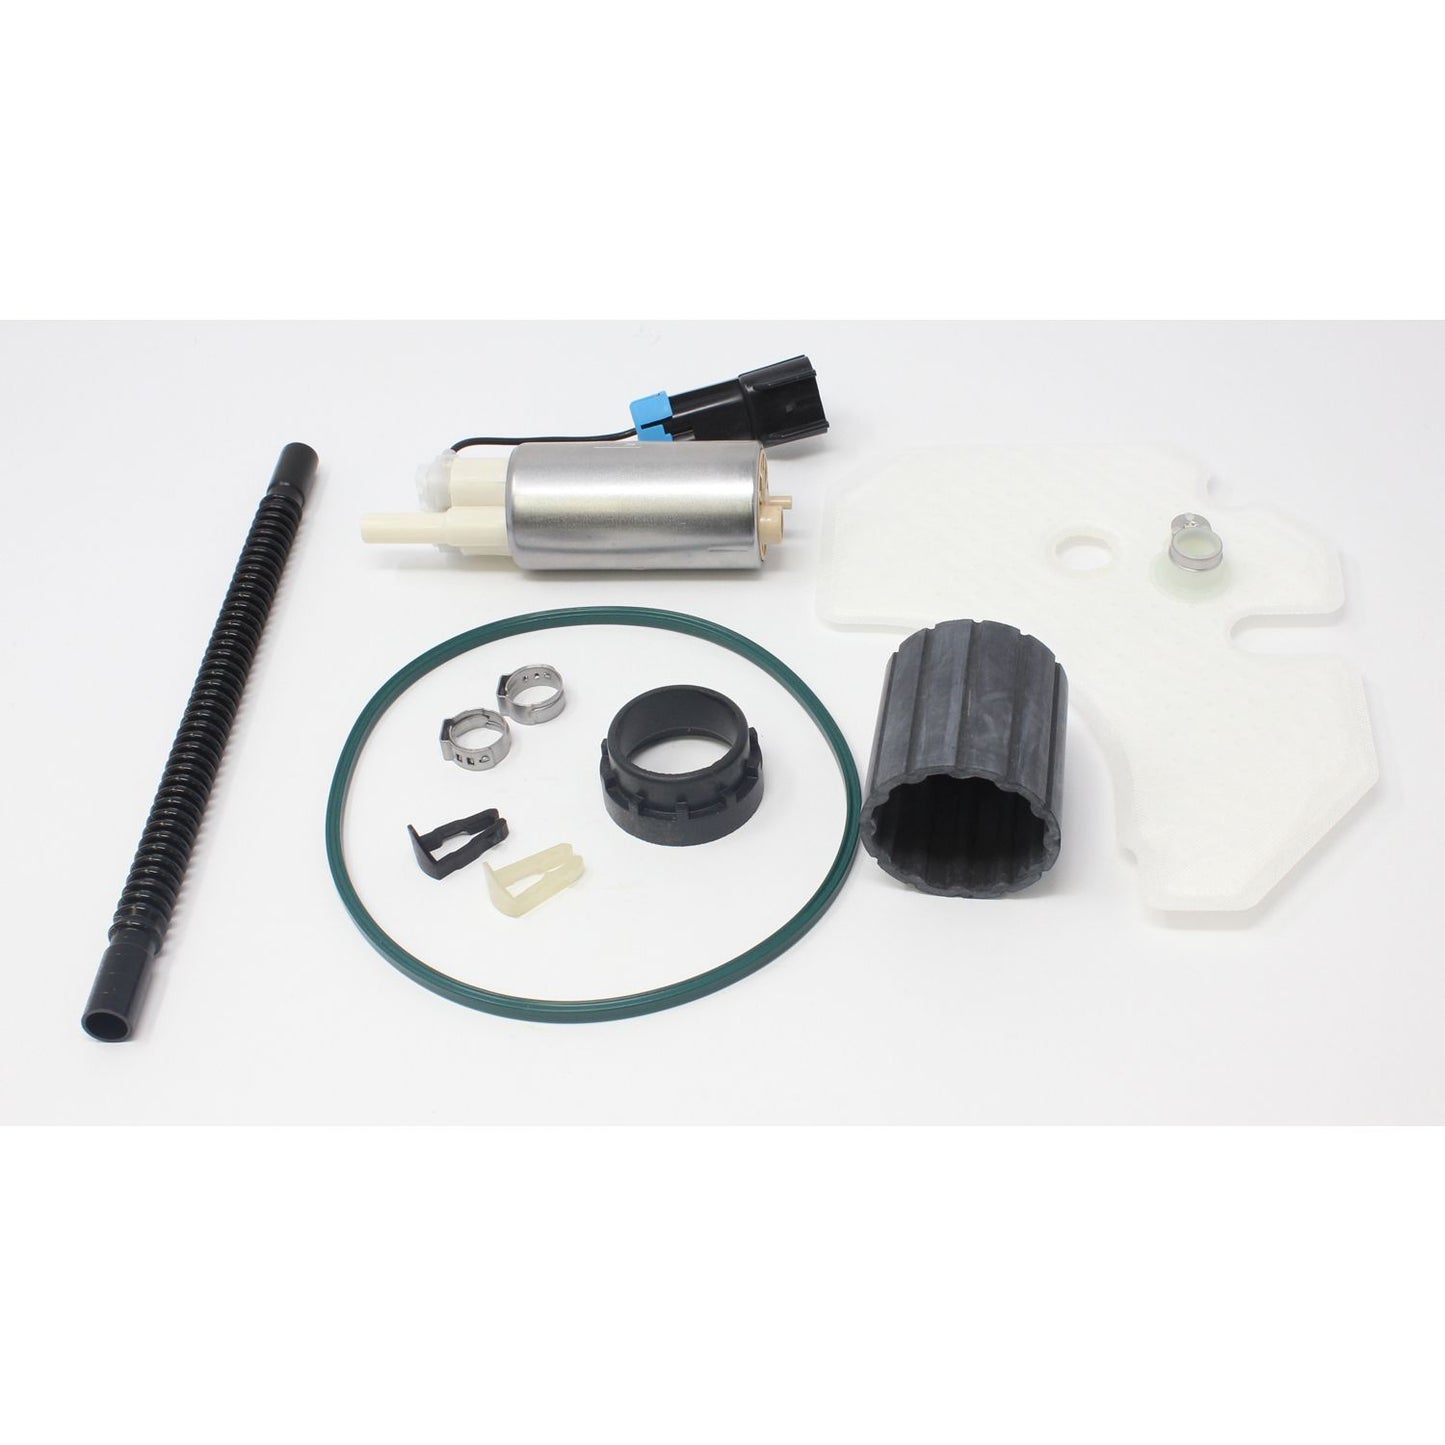 TI Automotive Stock Replacement Pump and Installation Kit for Gasoline Applications TCA933